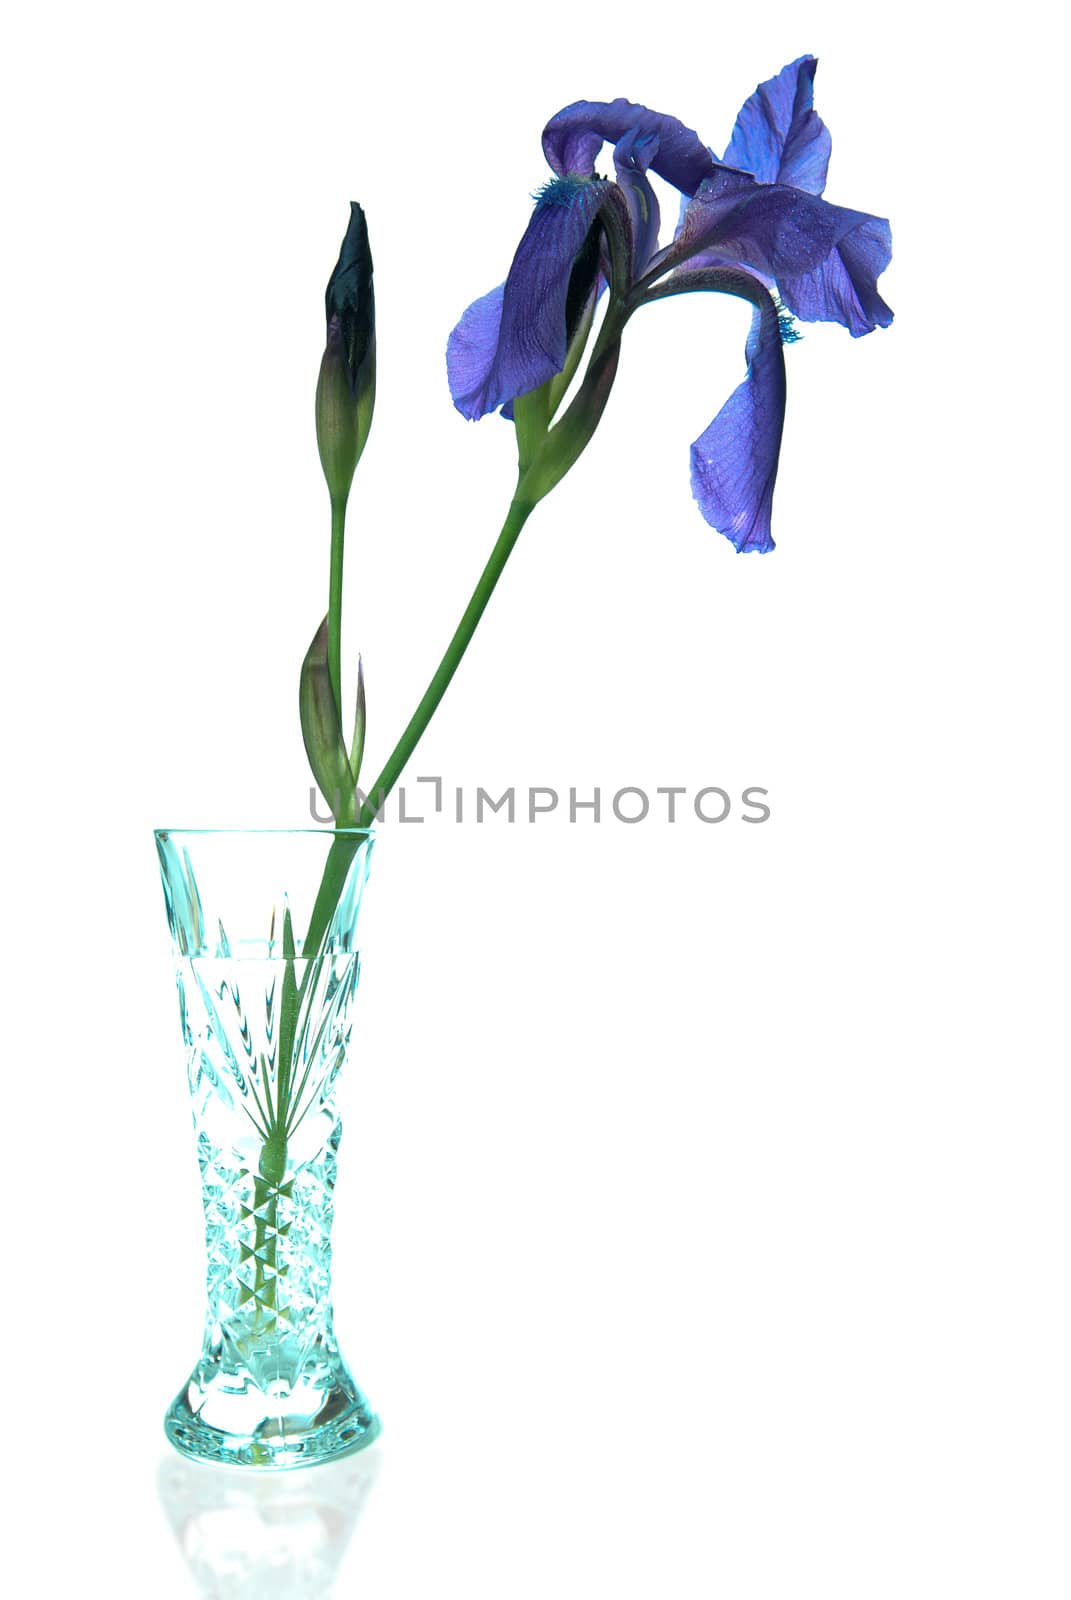 A single iris flower in a crystal vase, isolated against a white background.